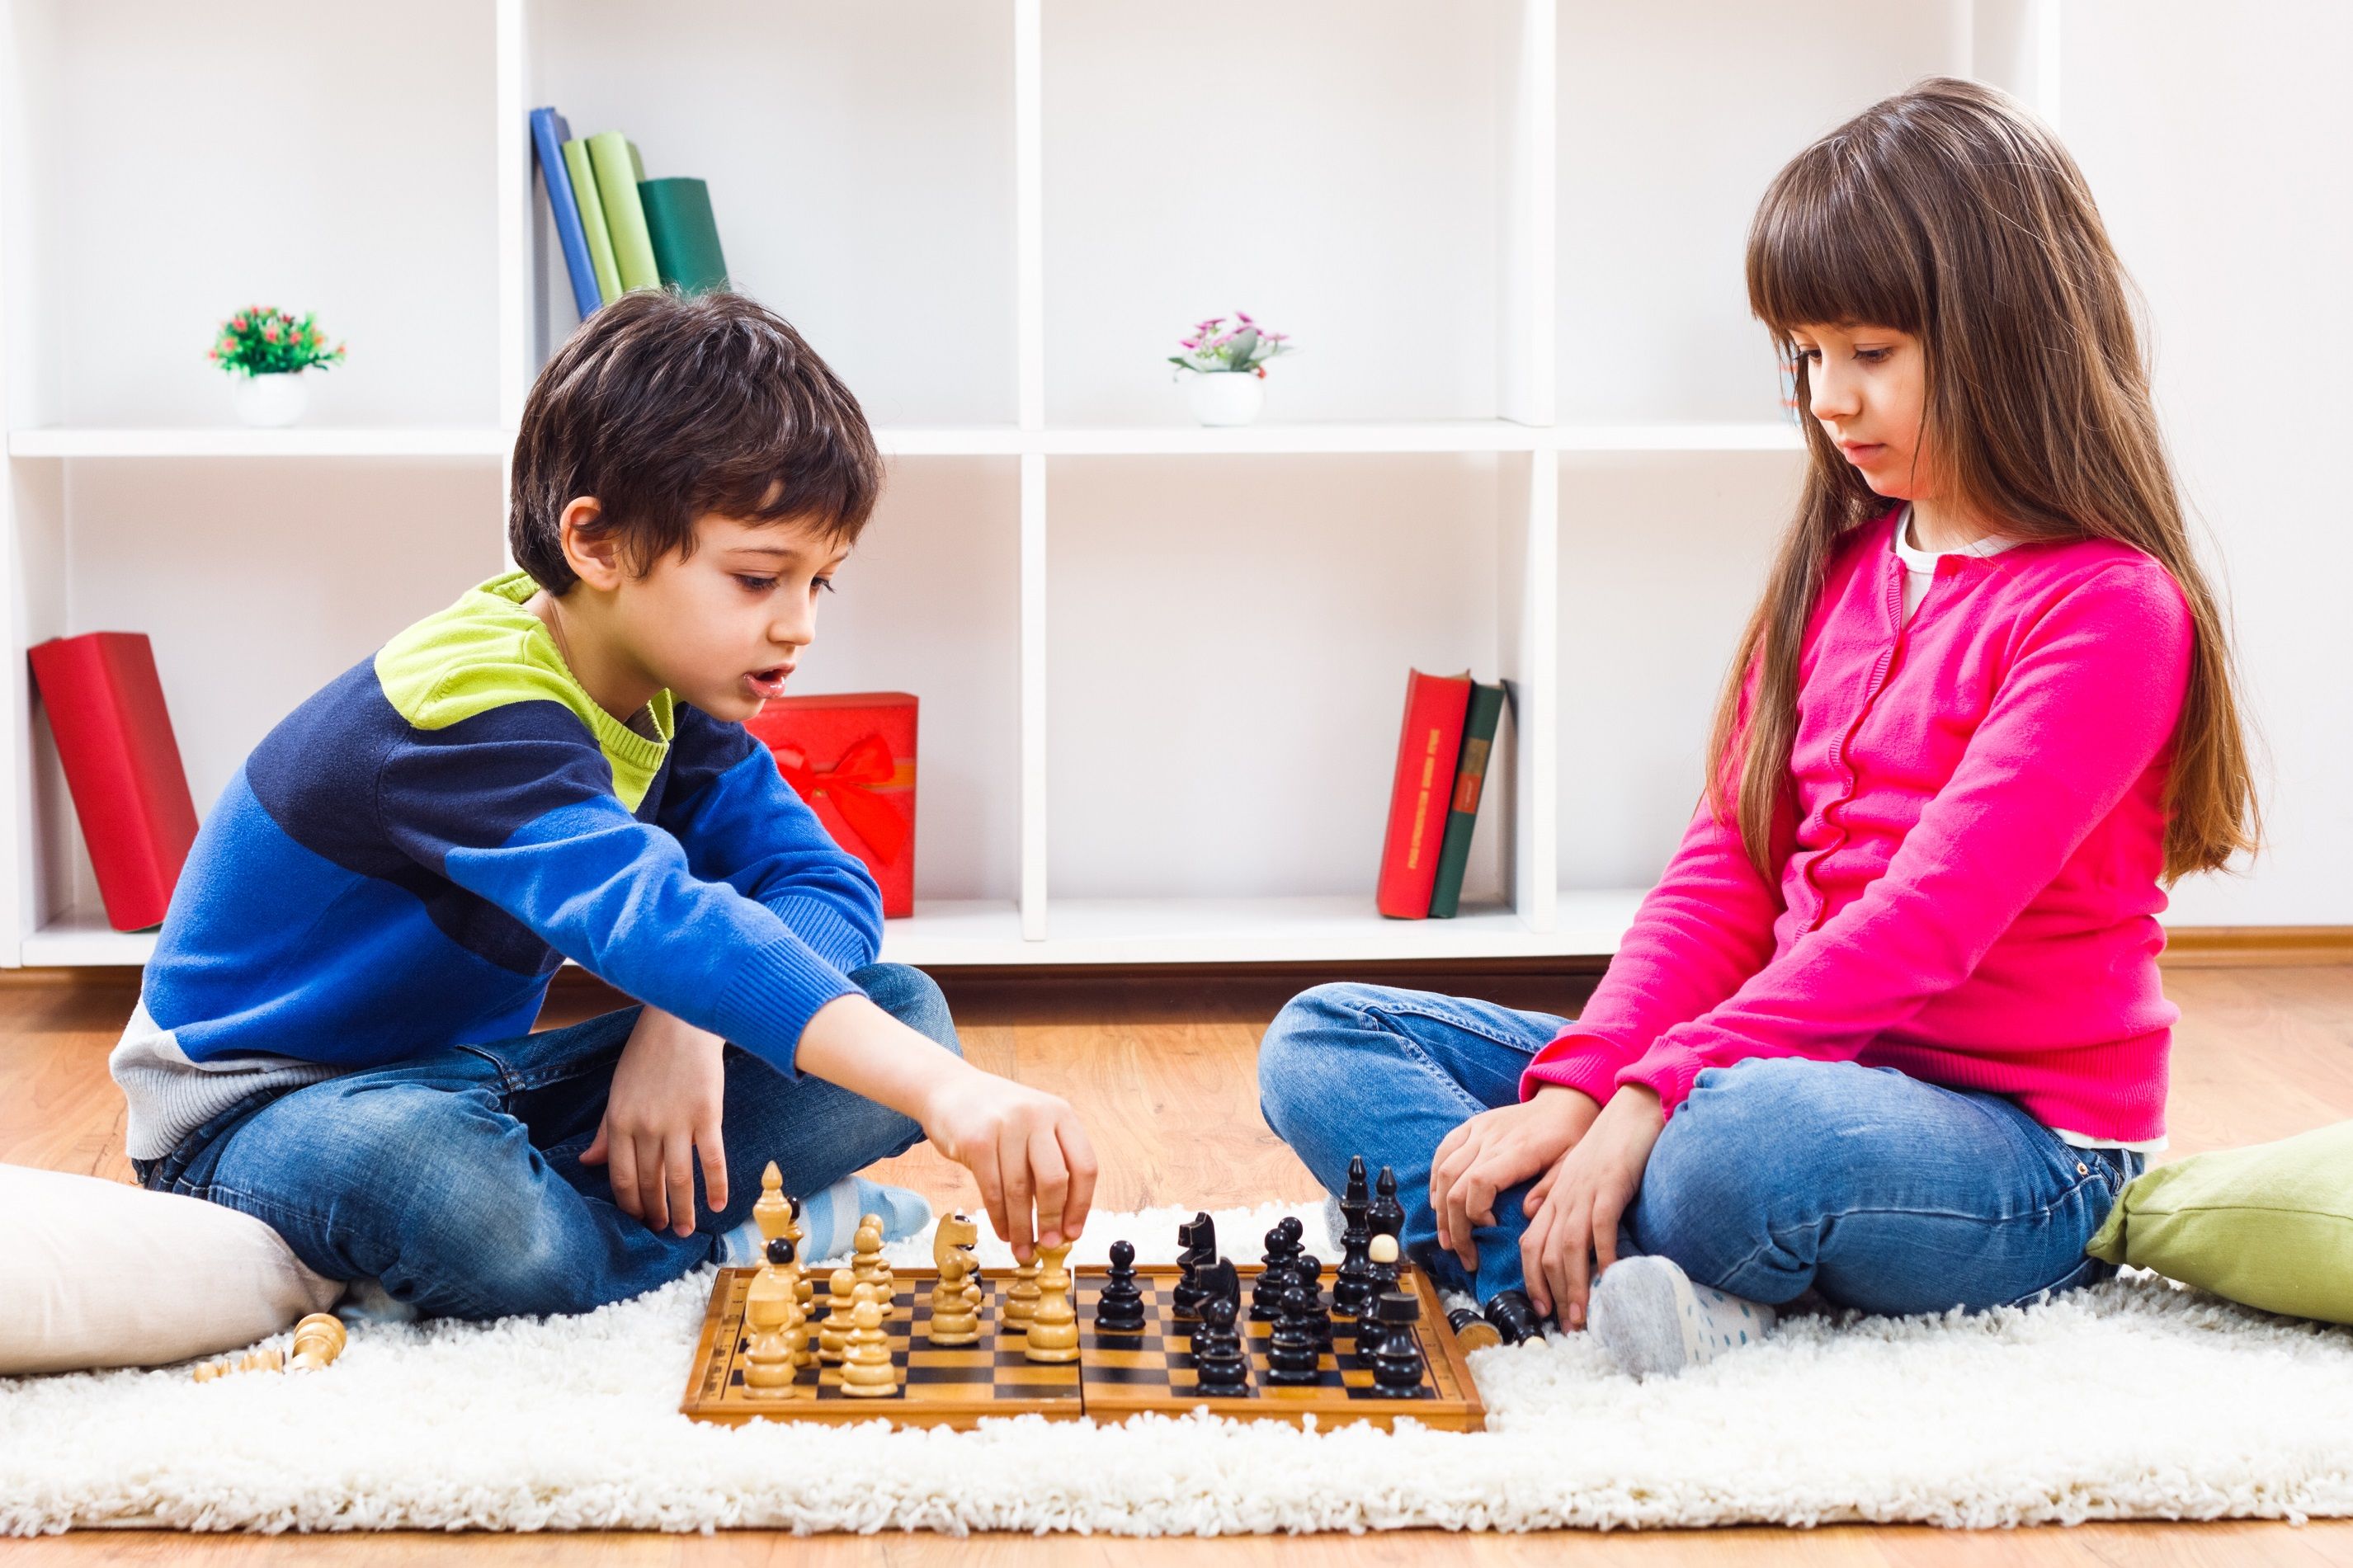 A young boy and girl playing chess together.